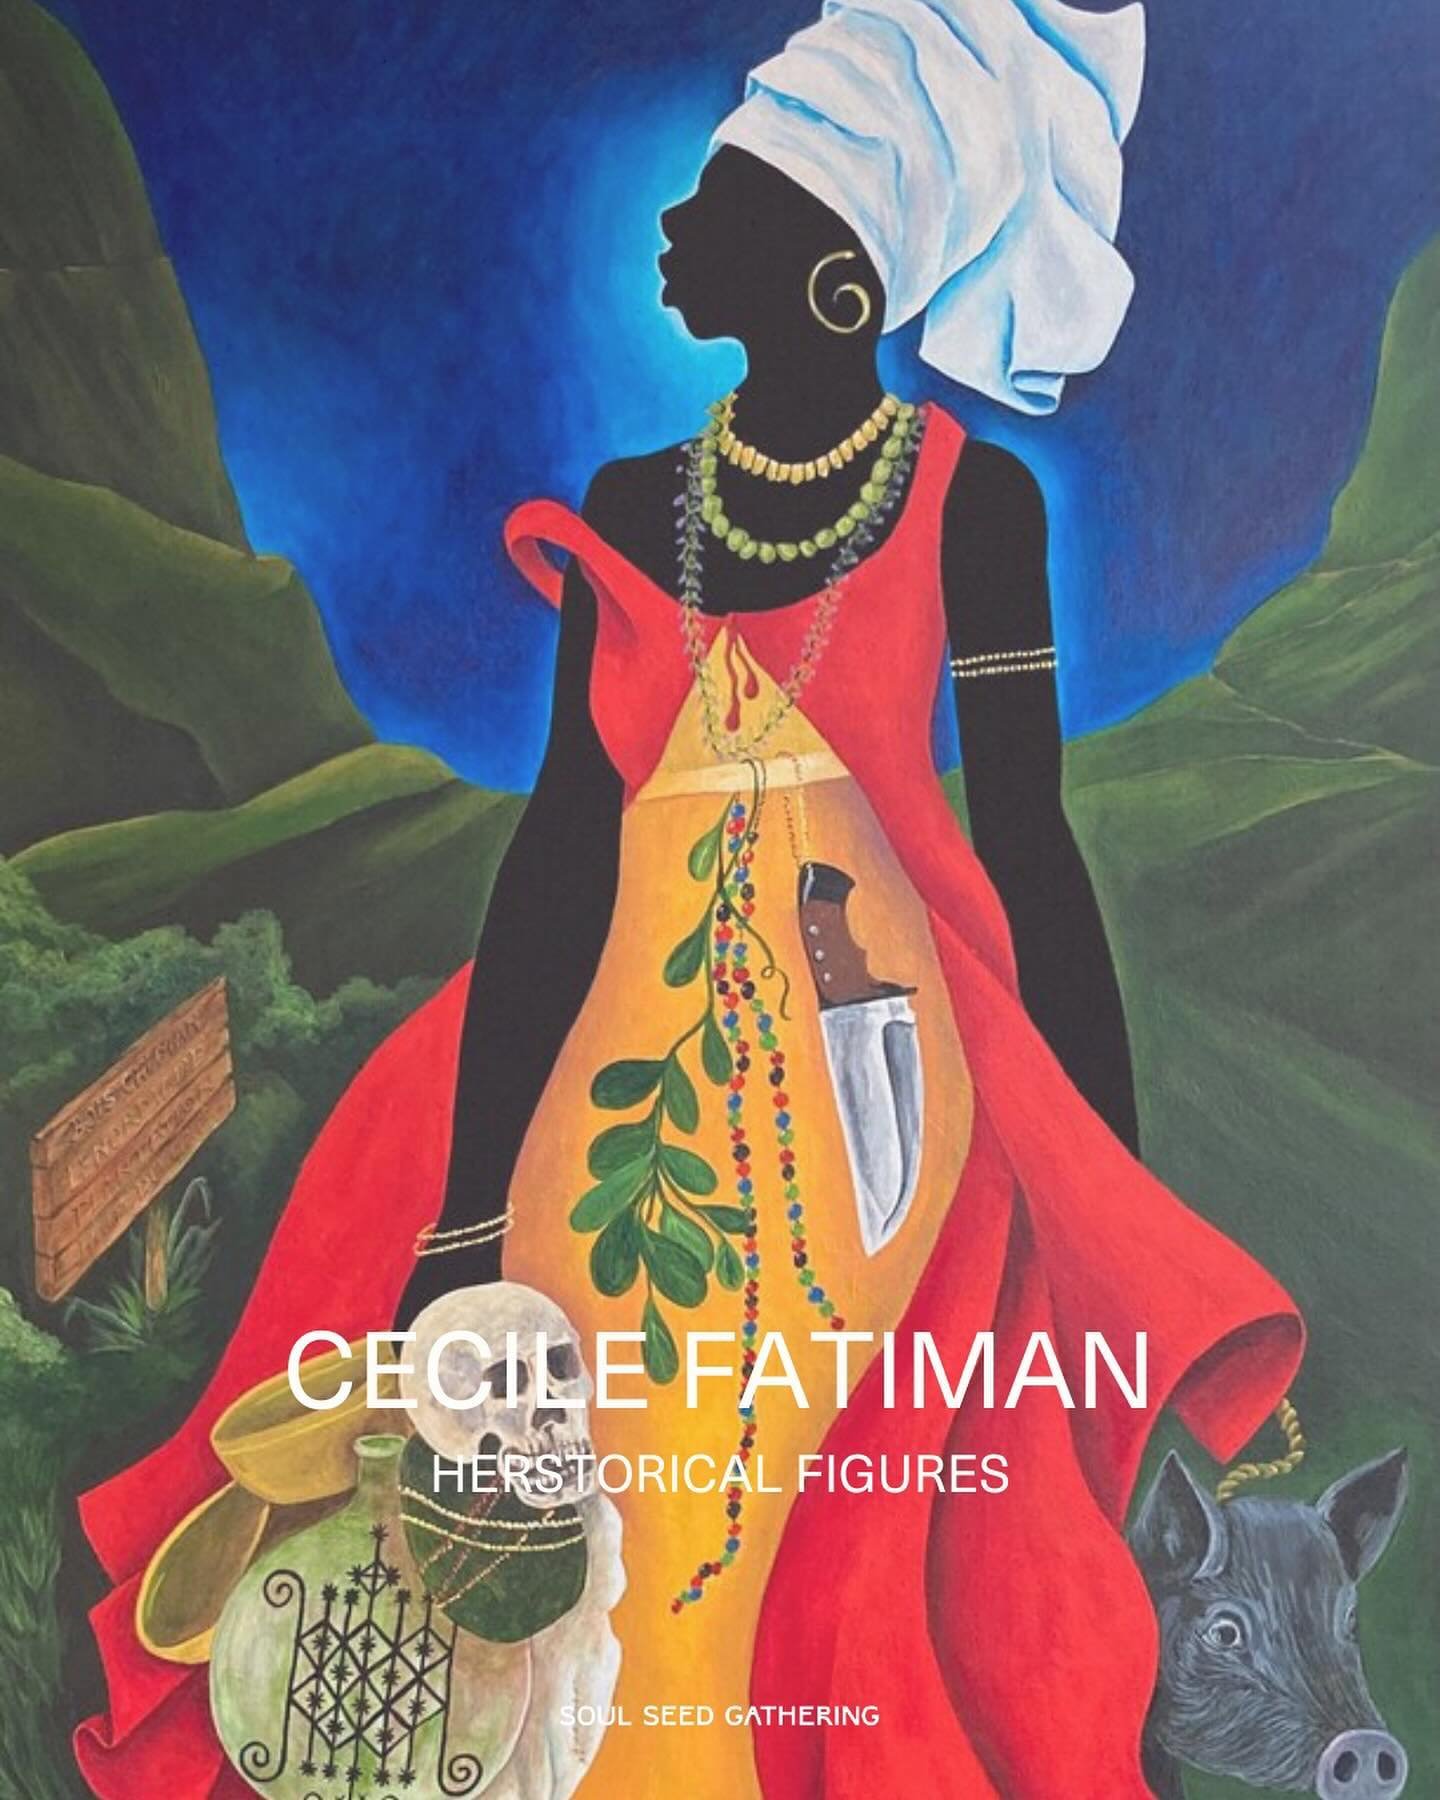 Learn about Cecile Fatiman, as we continue to explore #herstorical figures, priestesses, women and revolutionaries who shaped history.

&mdash; SWIPE to read more 

&amp; visit our Soul Bloom Magazine Substack link in bio @soulseedgathering to learn 